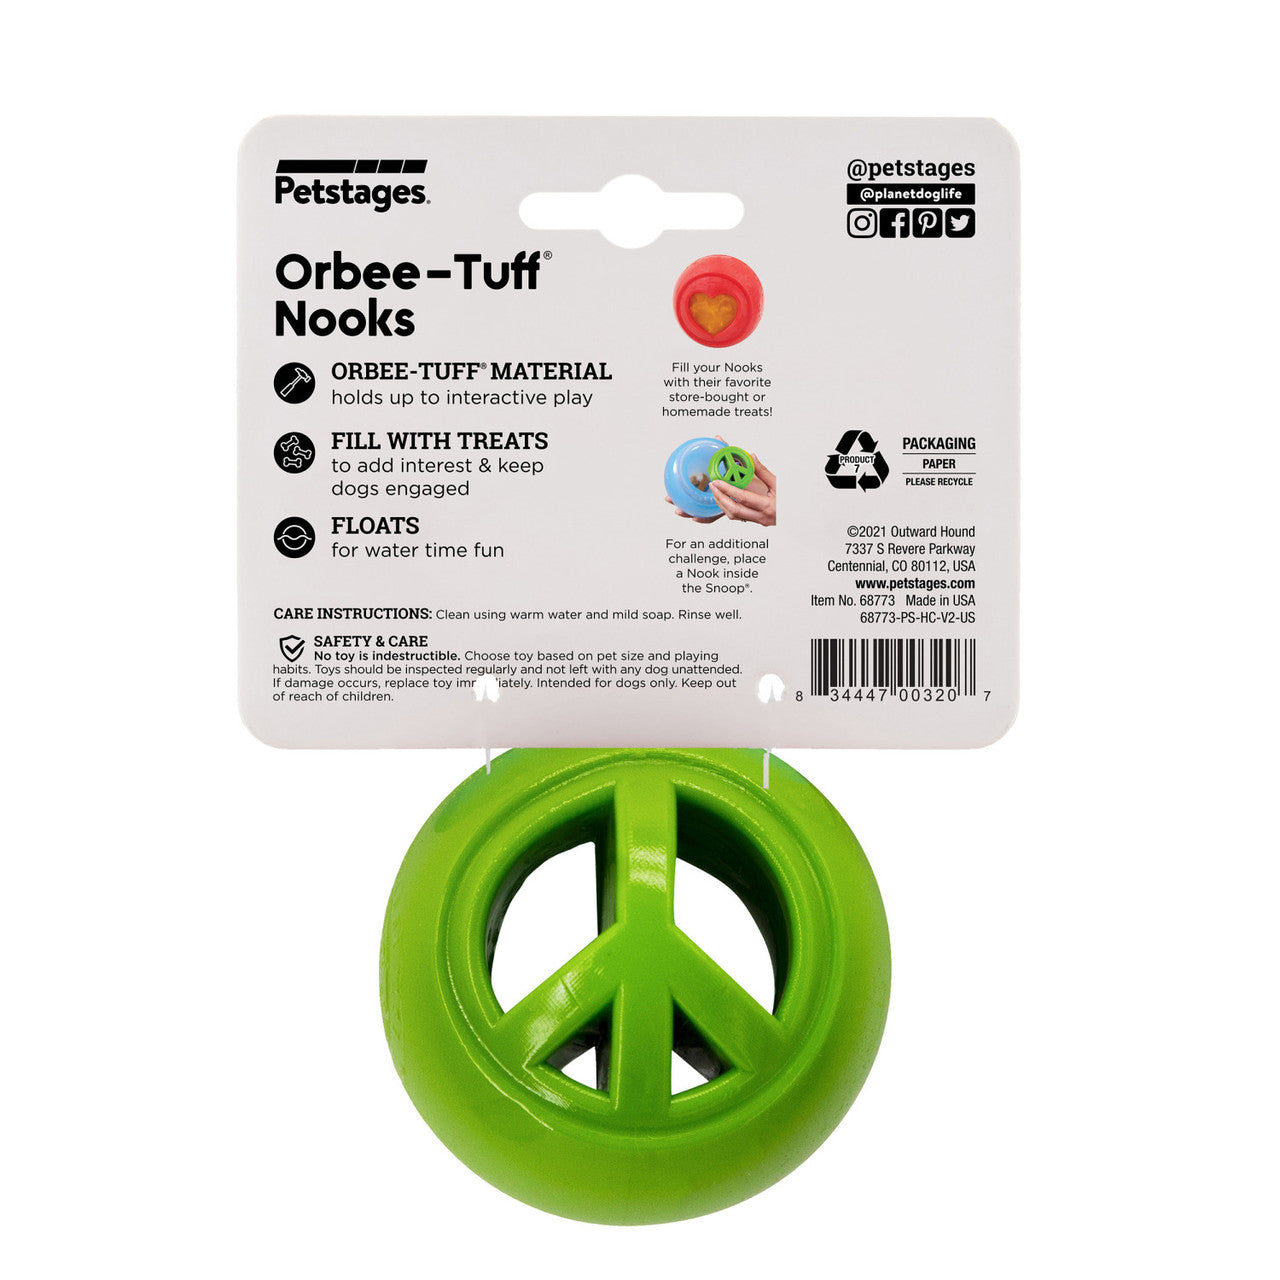 Nook ball is made from the award-winning Orbee-Tuff material, which is 100% recyclable and non-toxic. Ball is durable, bouncy, buoyant, and perfect for tossing, fetching, and bouncing. Stuff with tiny treat bites, nut butter, or cheese.